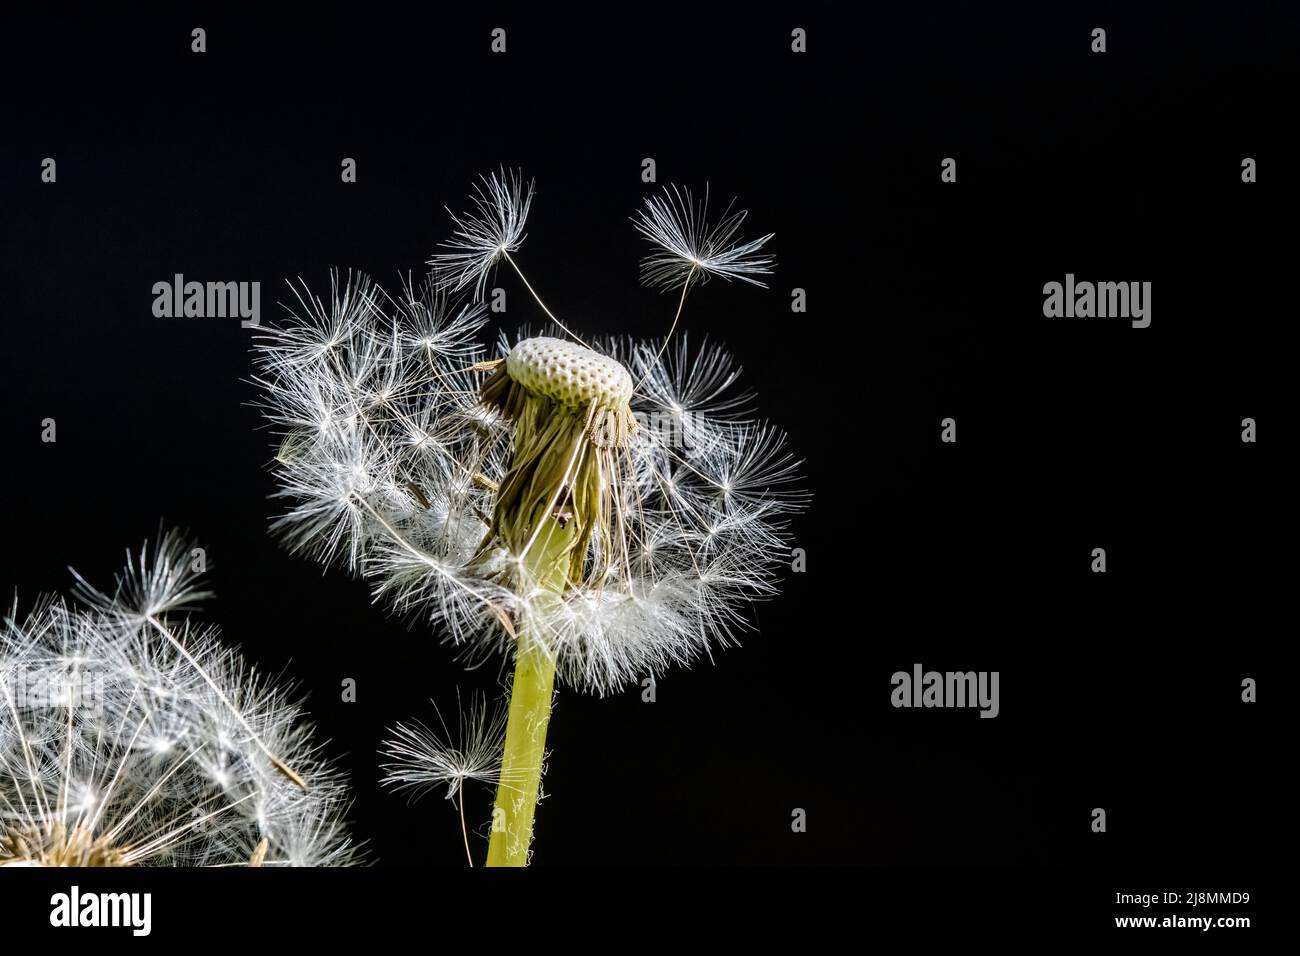 dandelion blowball with flying seeds on black background Stock Photo